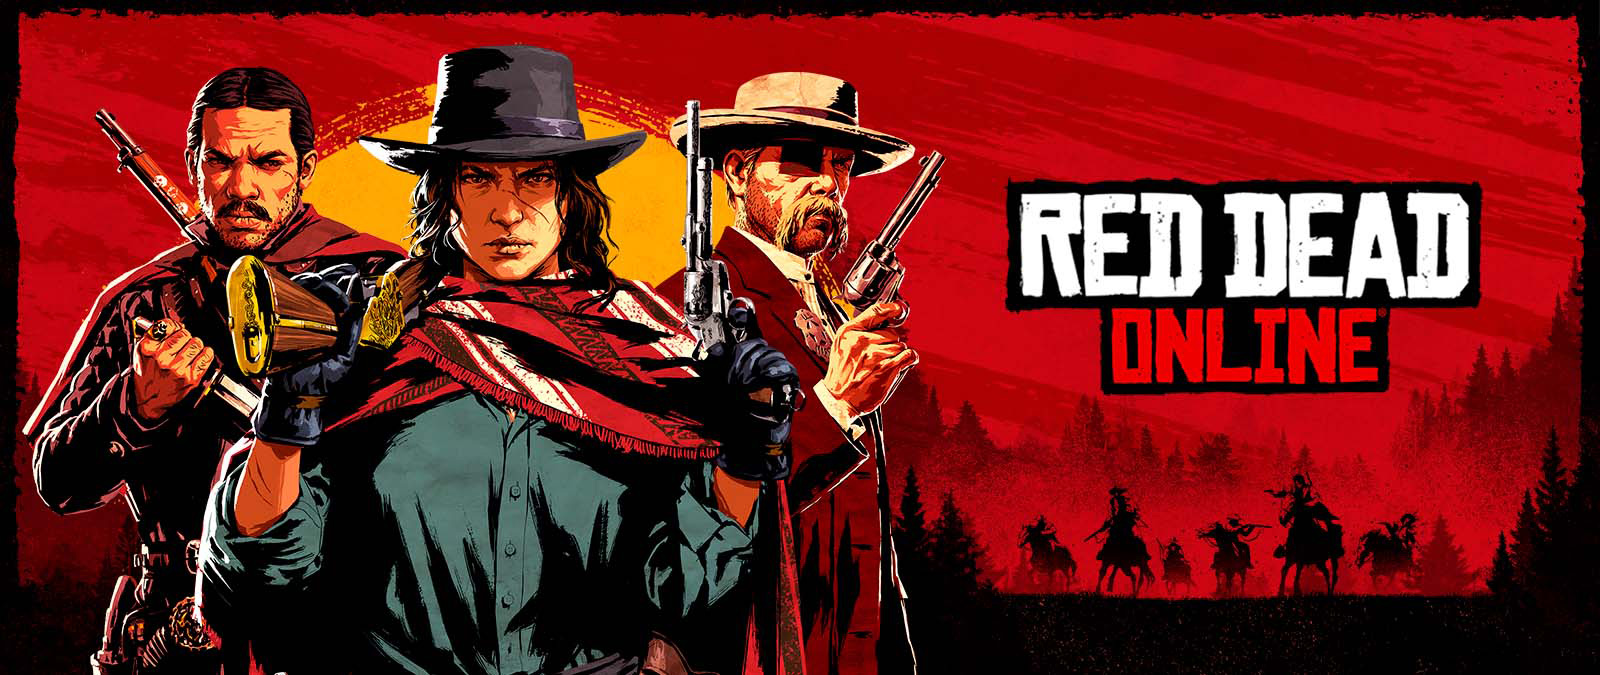 Red Dead Online. Three characters holding weapons in front of a sunset and shadows of other characters on horses.